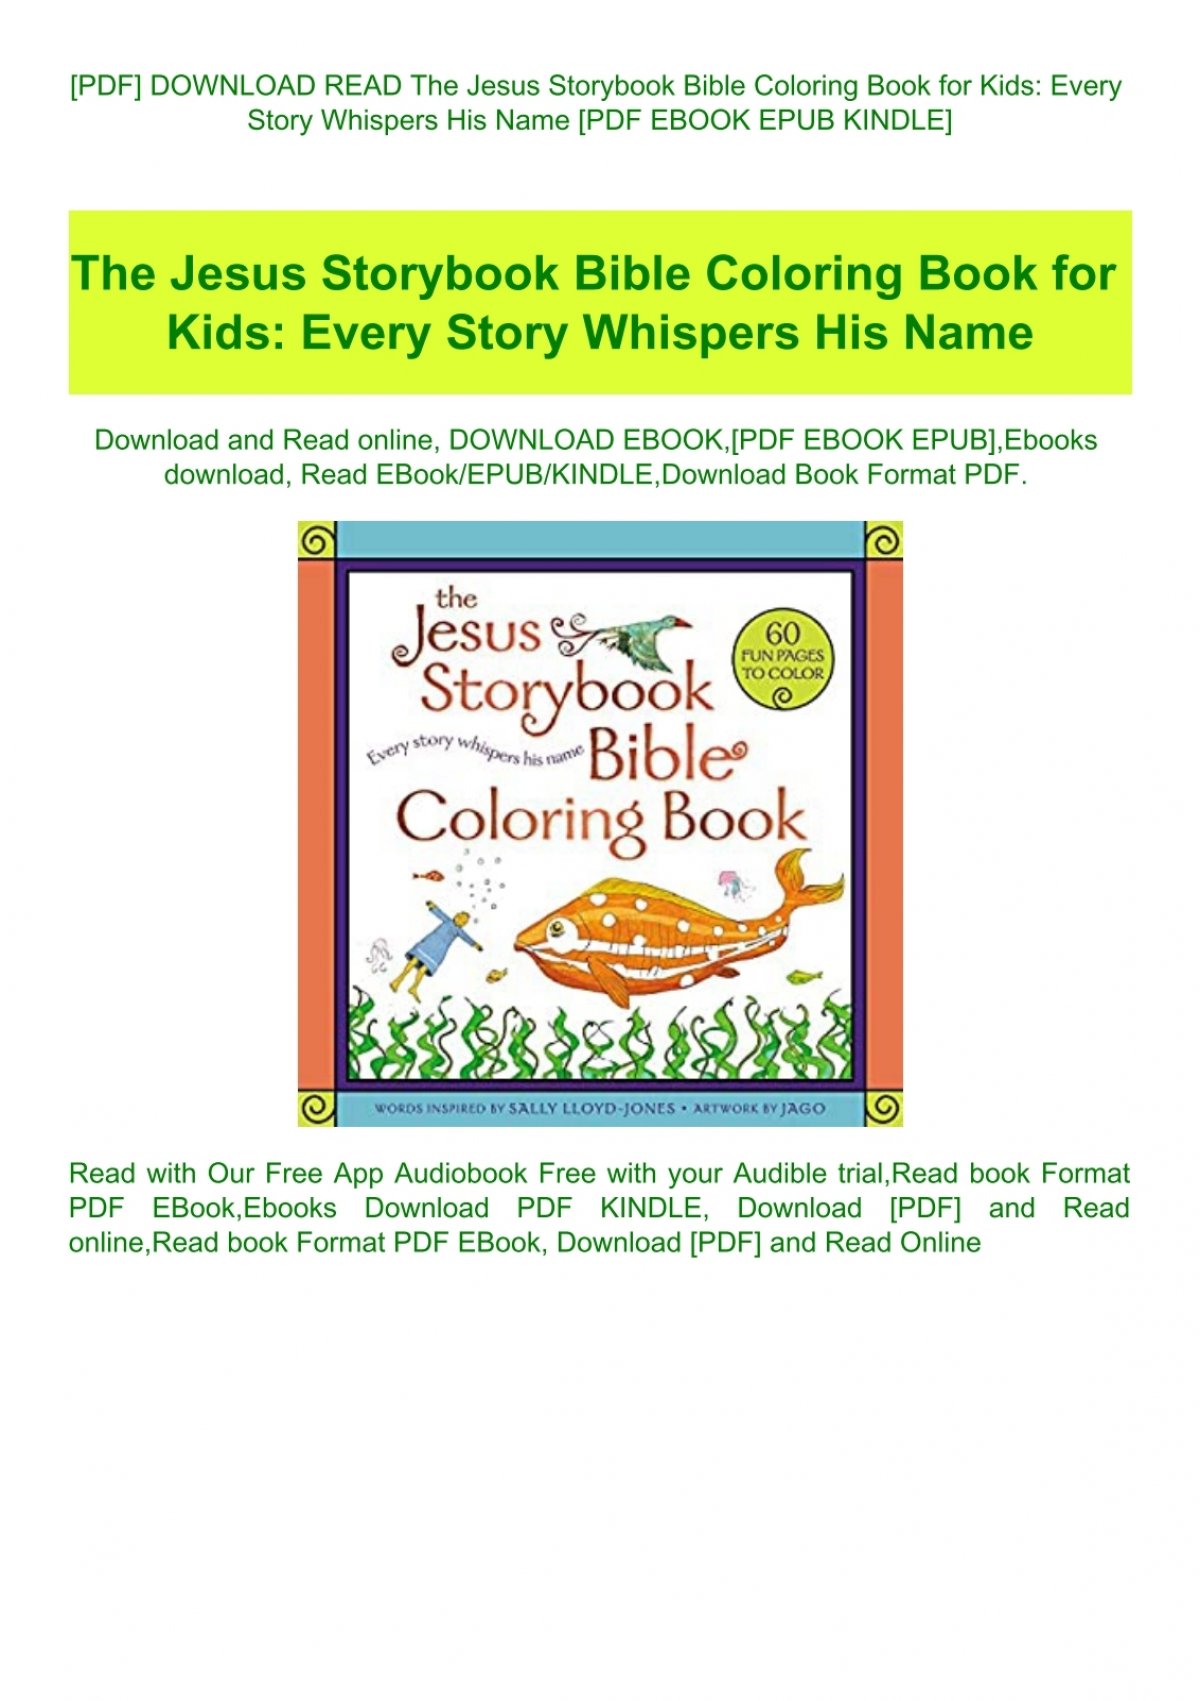 Download Pdf Download Read The Jesus Storybook Bible Coloring Book For Kids Every Story Whispers His Name Pdf Ebook Epub Kindle